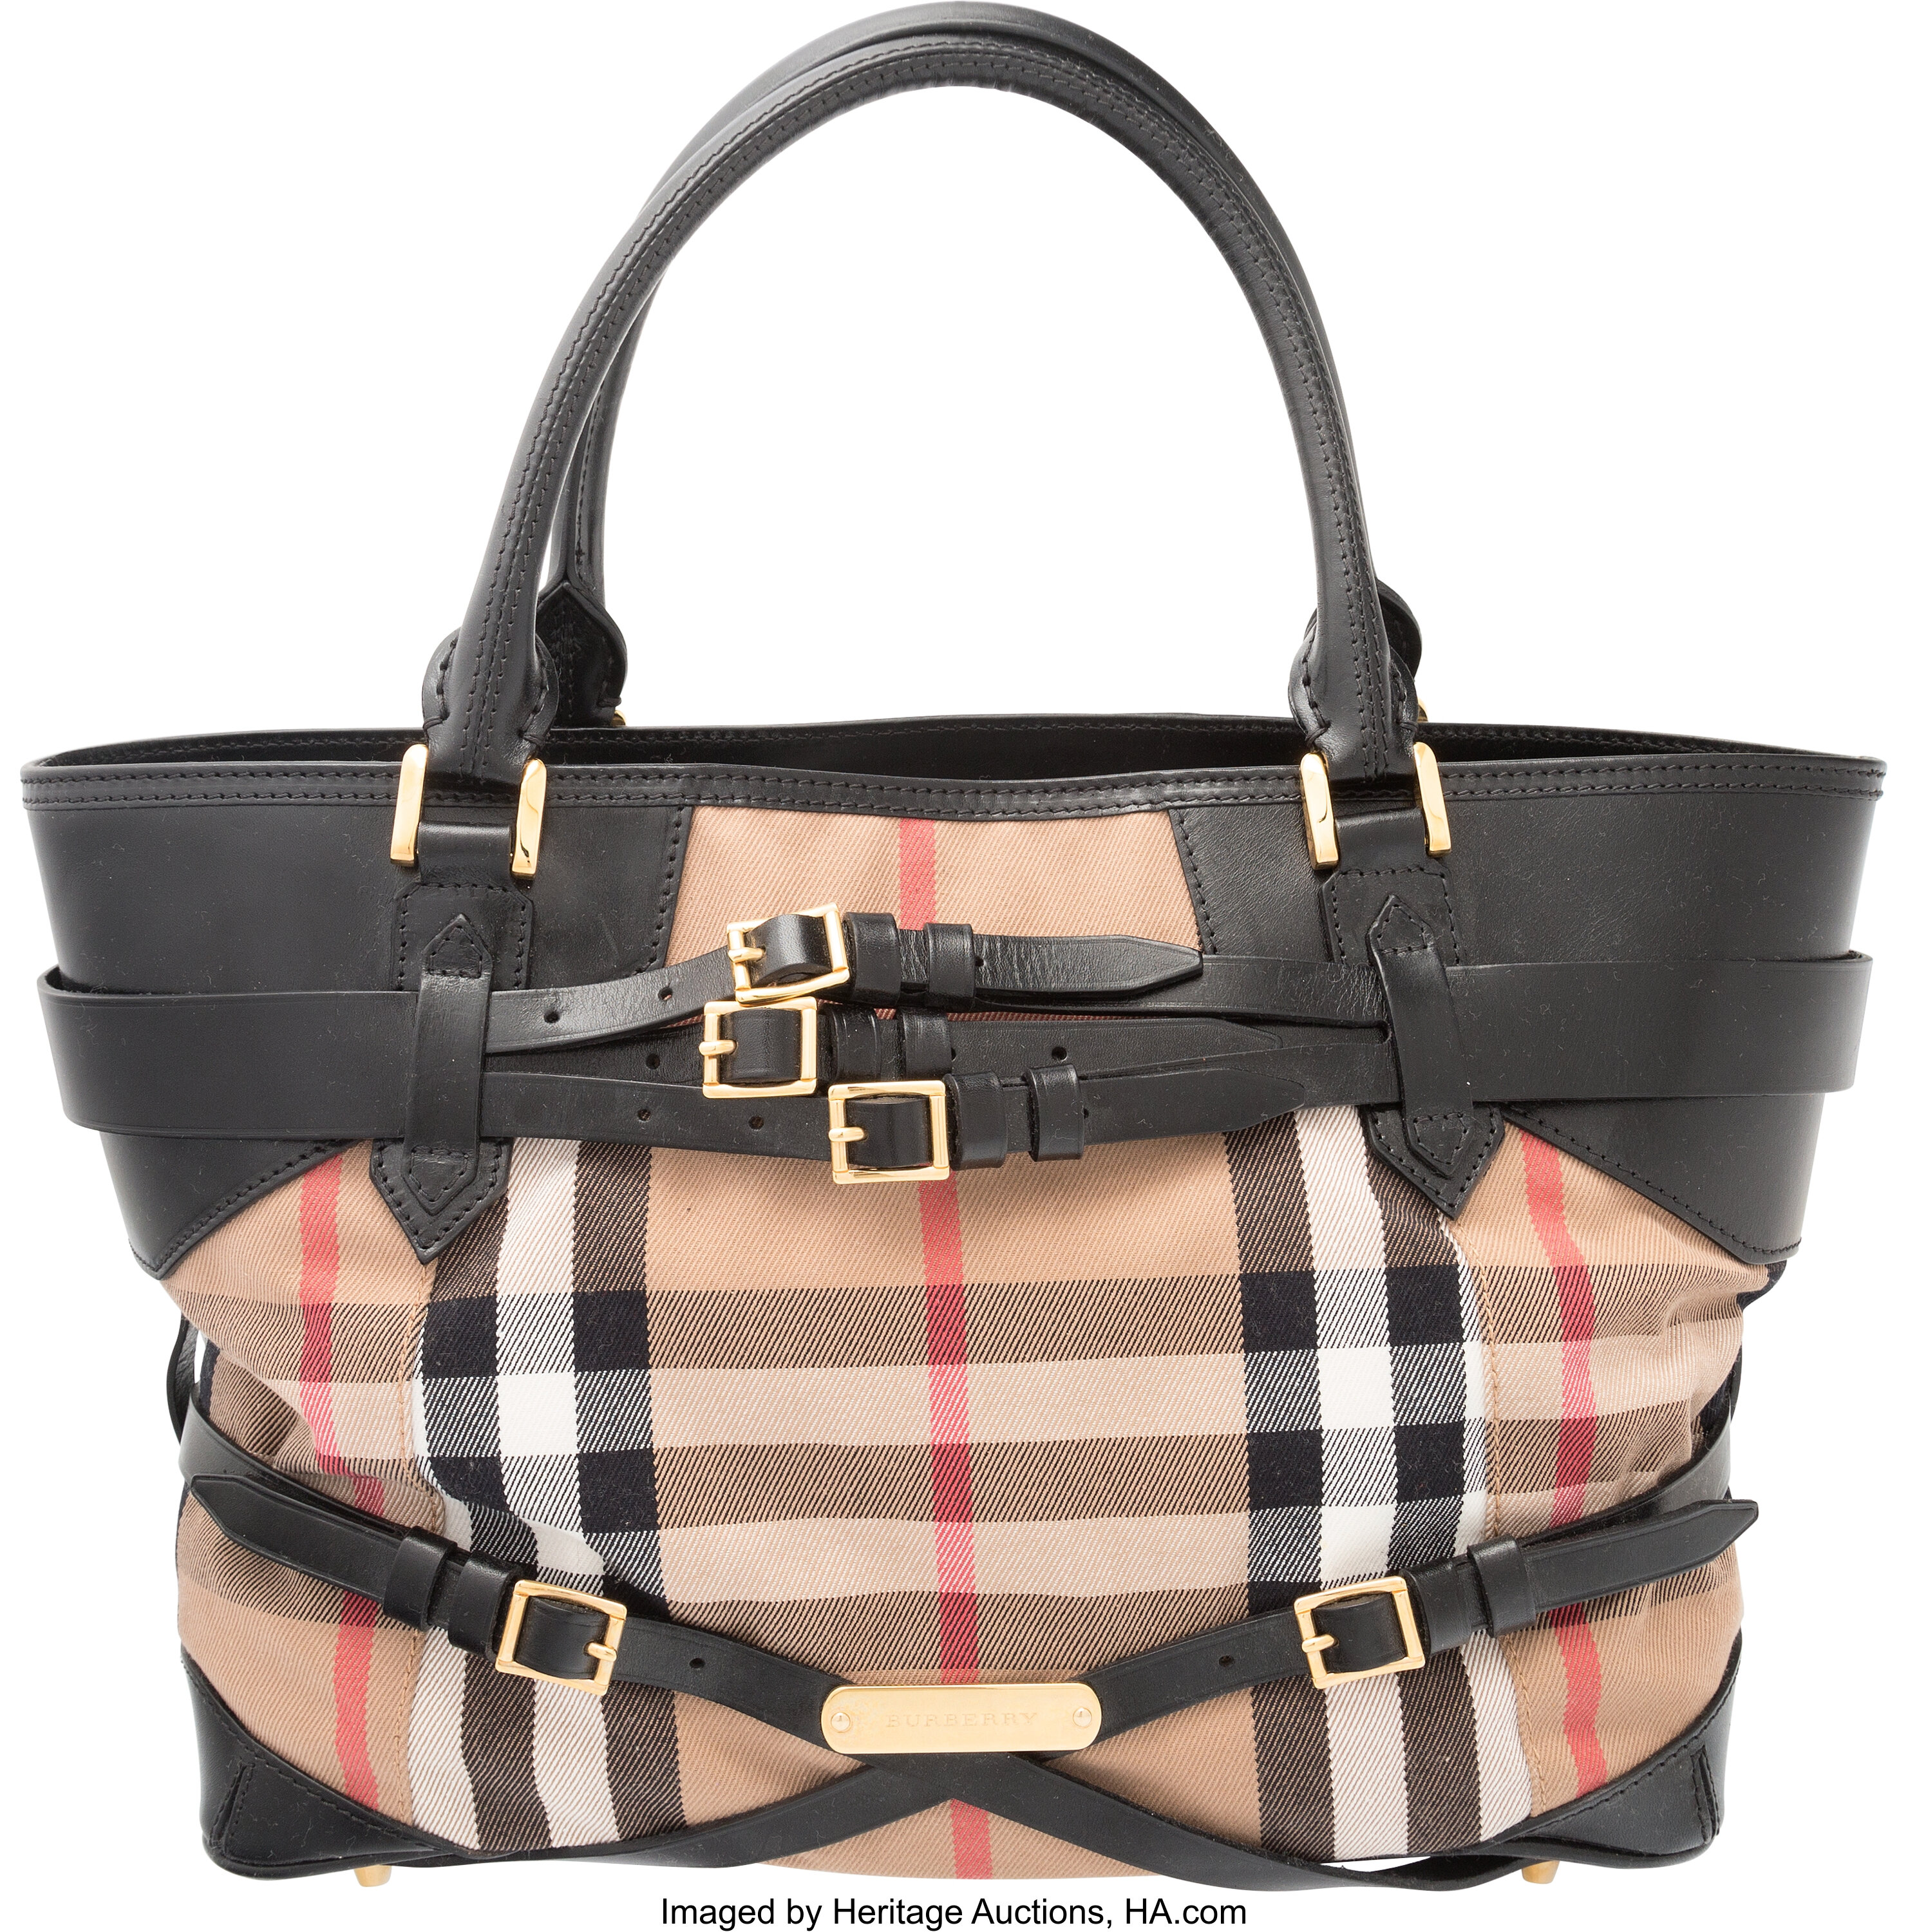 Sold at Auction: AUTHENTIC BURBERRY CANVAS, LEATHER BOSTON BAG